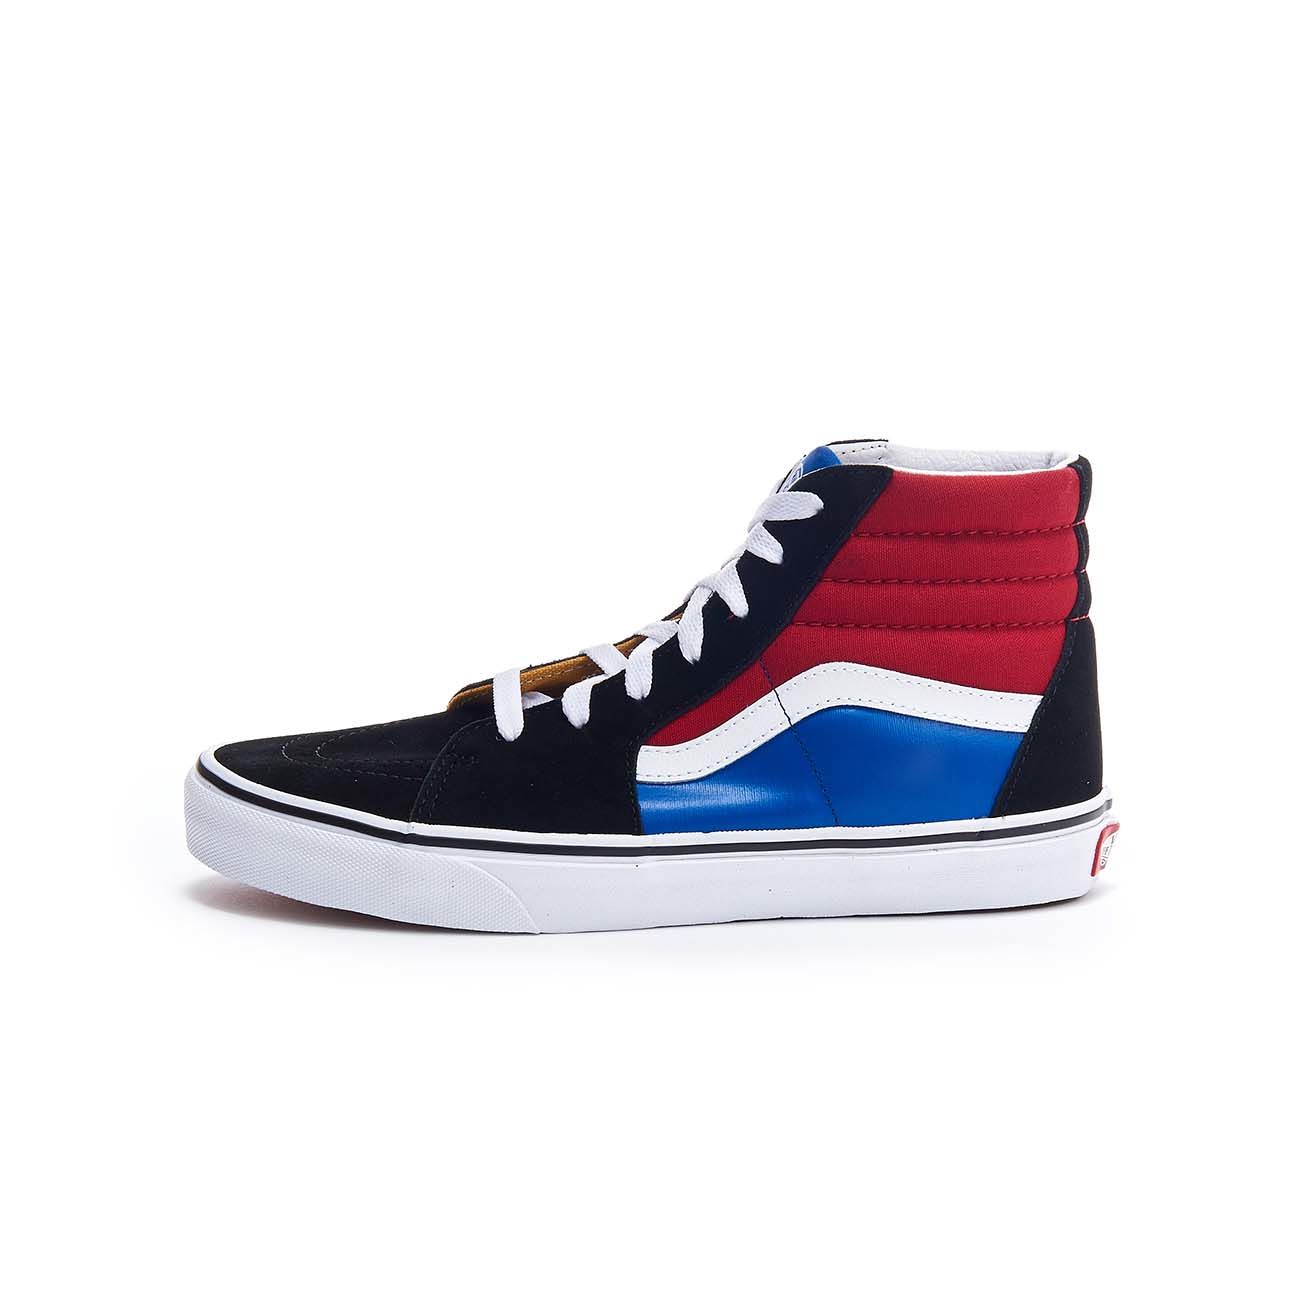 VANS SK8-HI HIGH SNEAKER | Pepper ECO-LEATHER Chilli Kid Black FABRIC AND Store IN Mascheroni